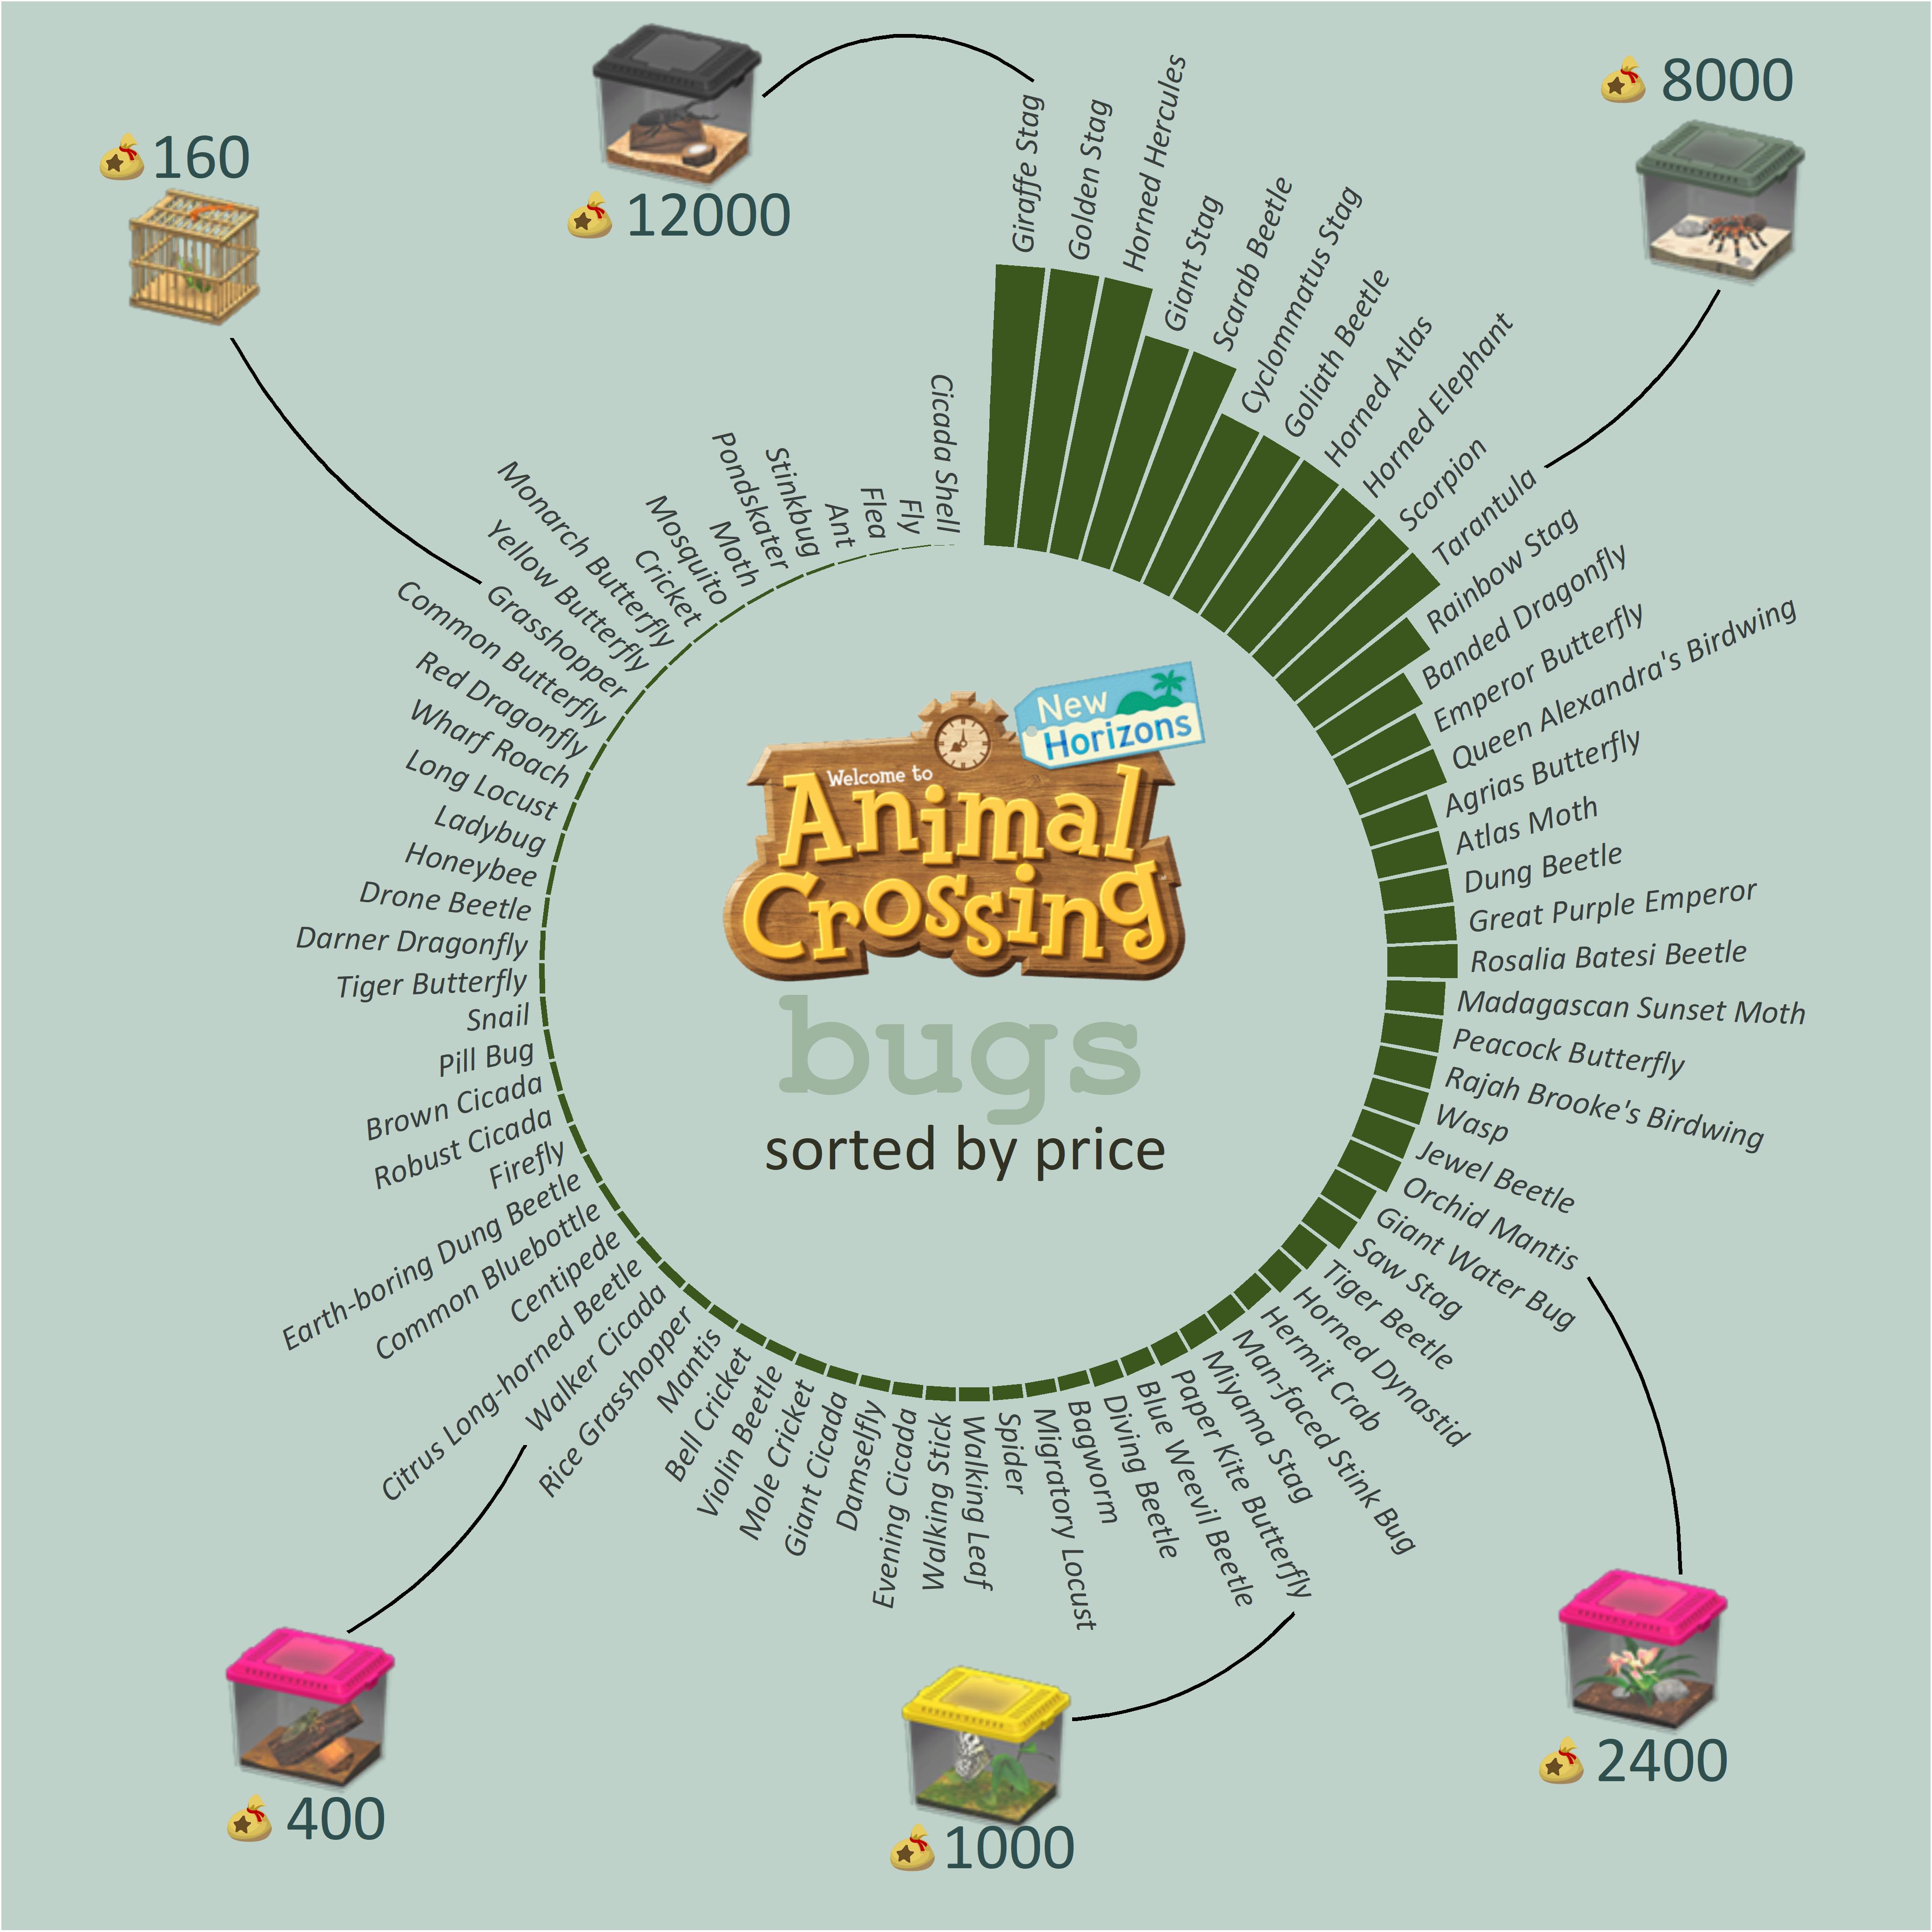 A plot showing the sell worth of bugs in Animal Crossing New Horizons